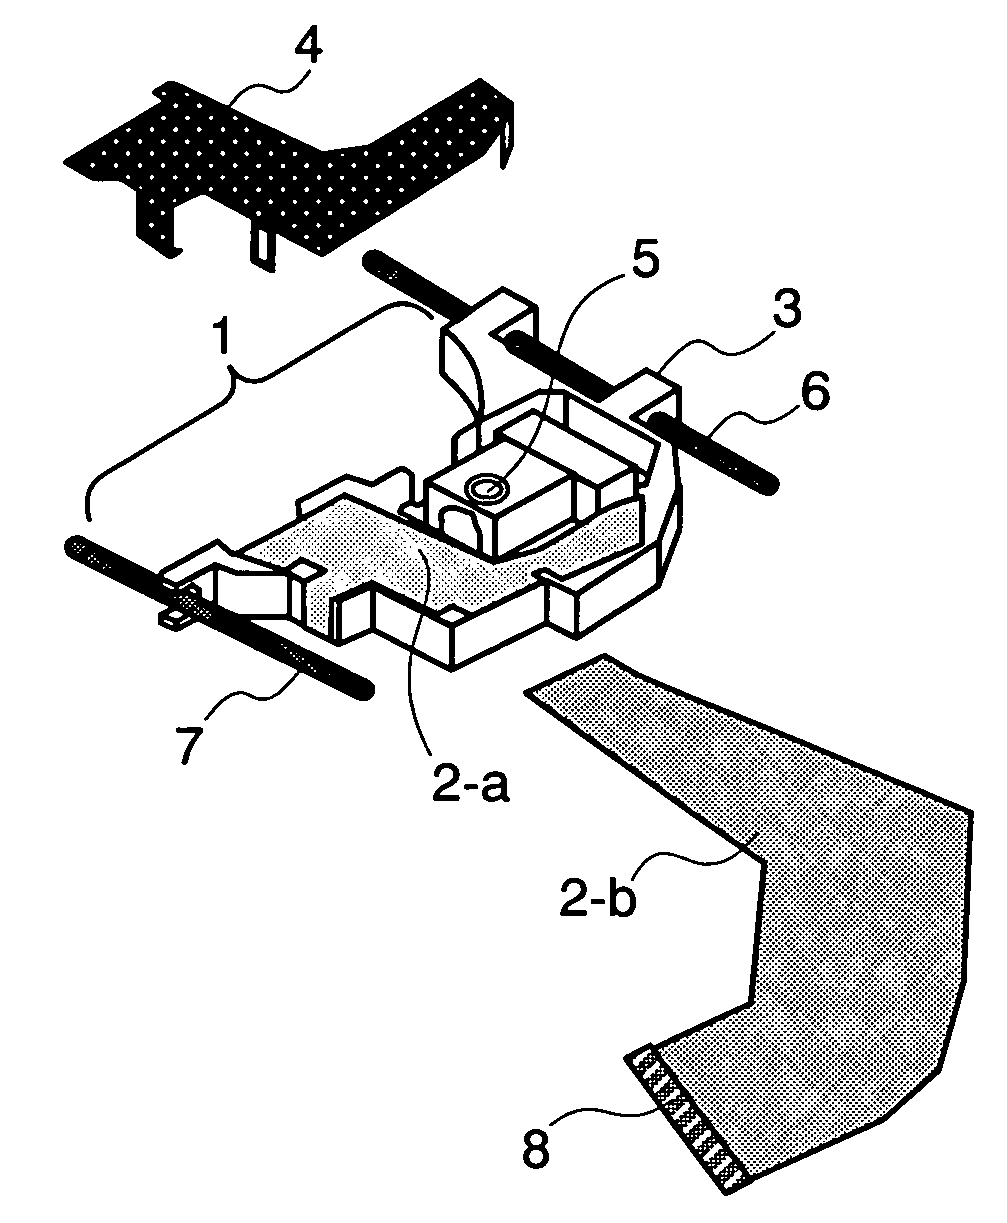 Optical disk drive apparatus having a flexible substrate and wiring conductors